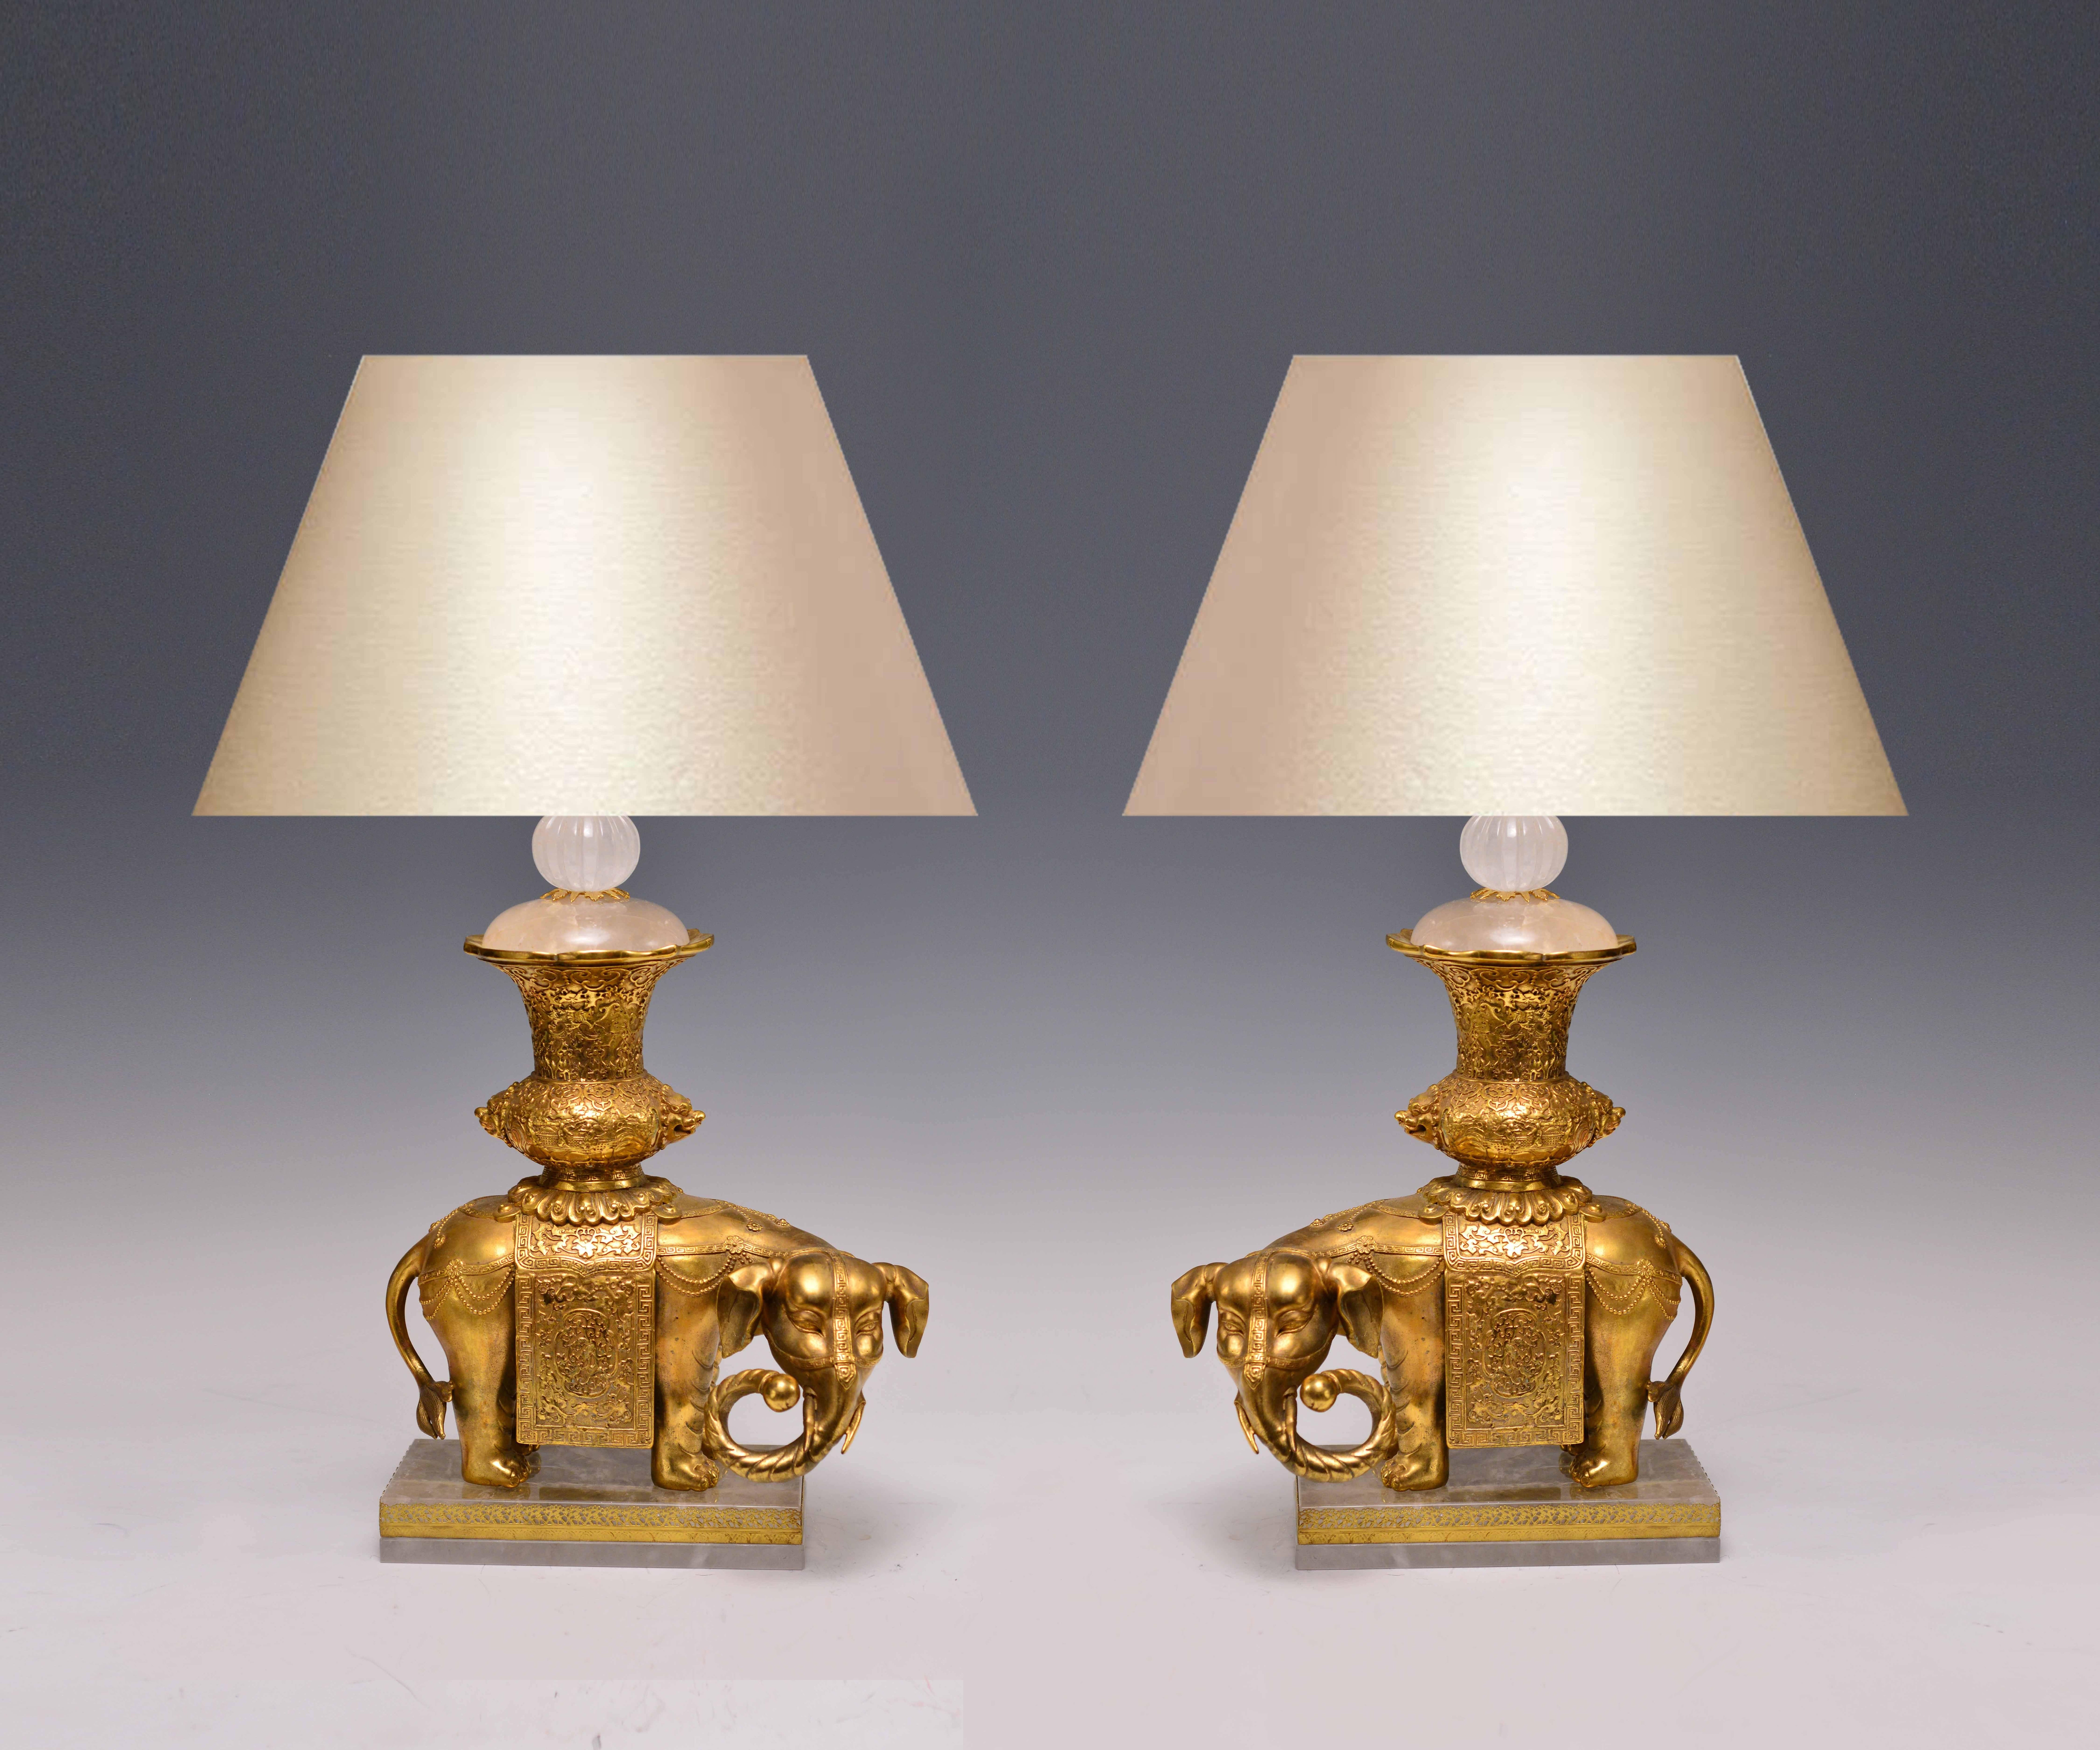 Fine cast gilt bronze figures of the elephant's lamps with rock crystals, created by Phoenix Gallery, NYC.
(Lampshade not included)
